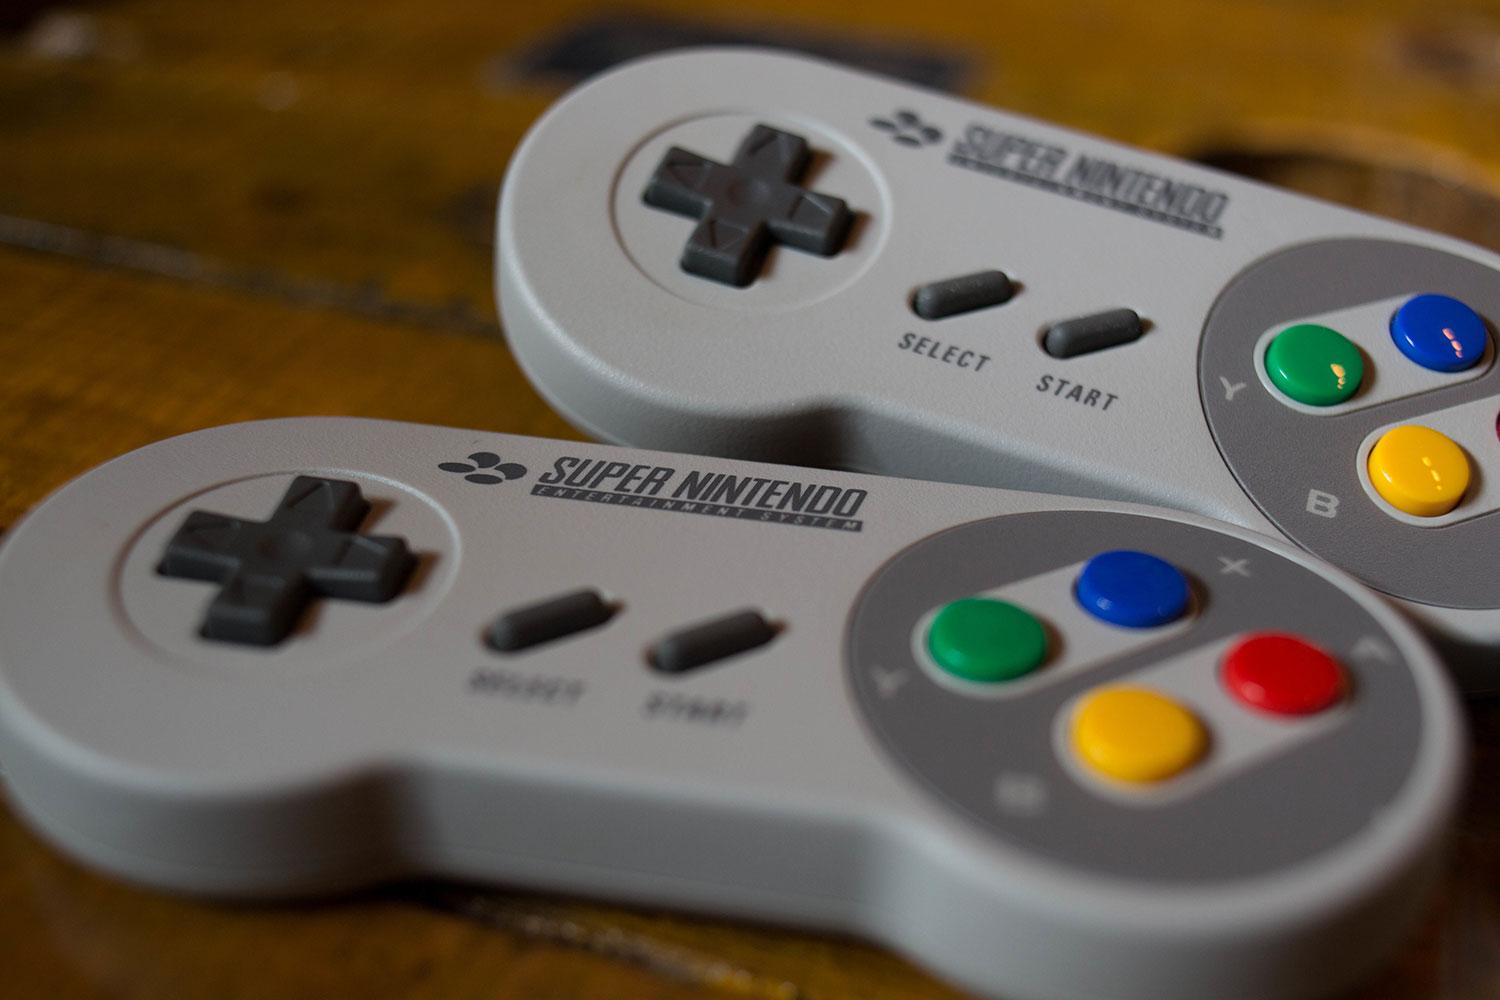 The 5 Best Retro Game Consoles in 2022 - The Manual